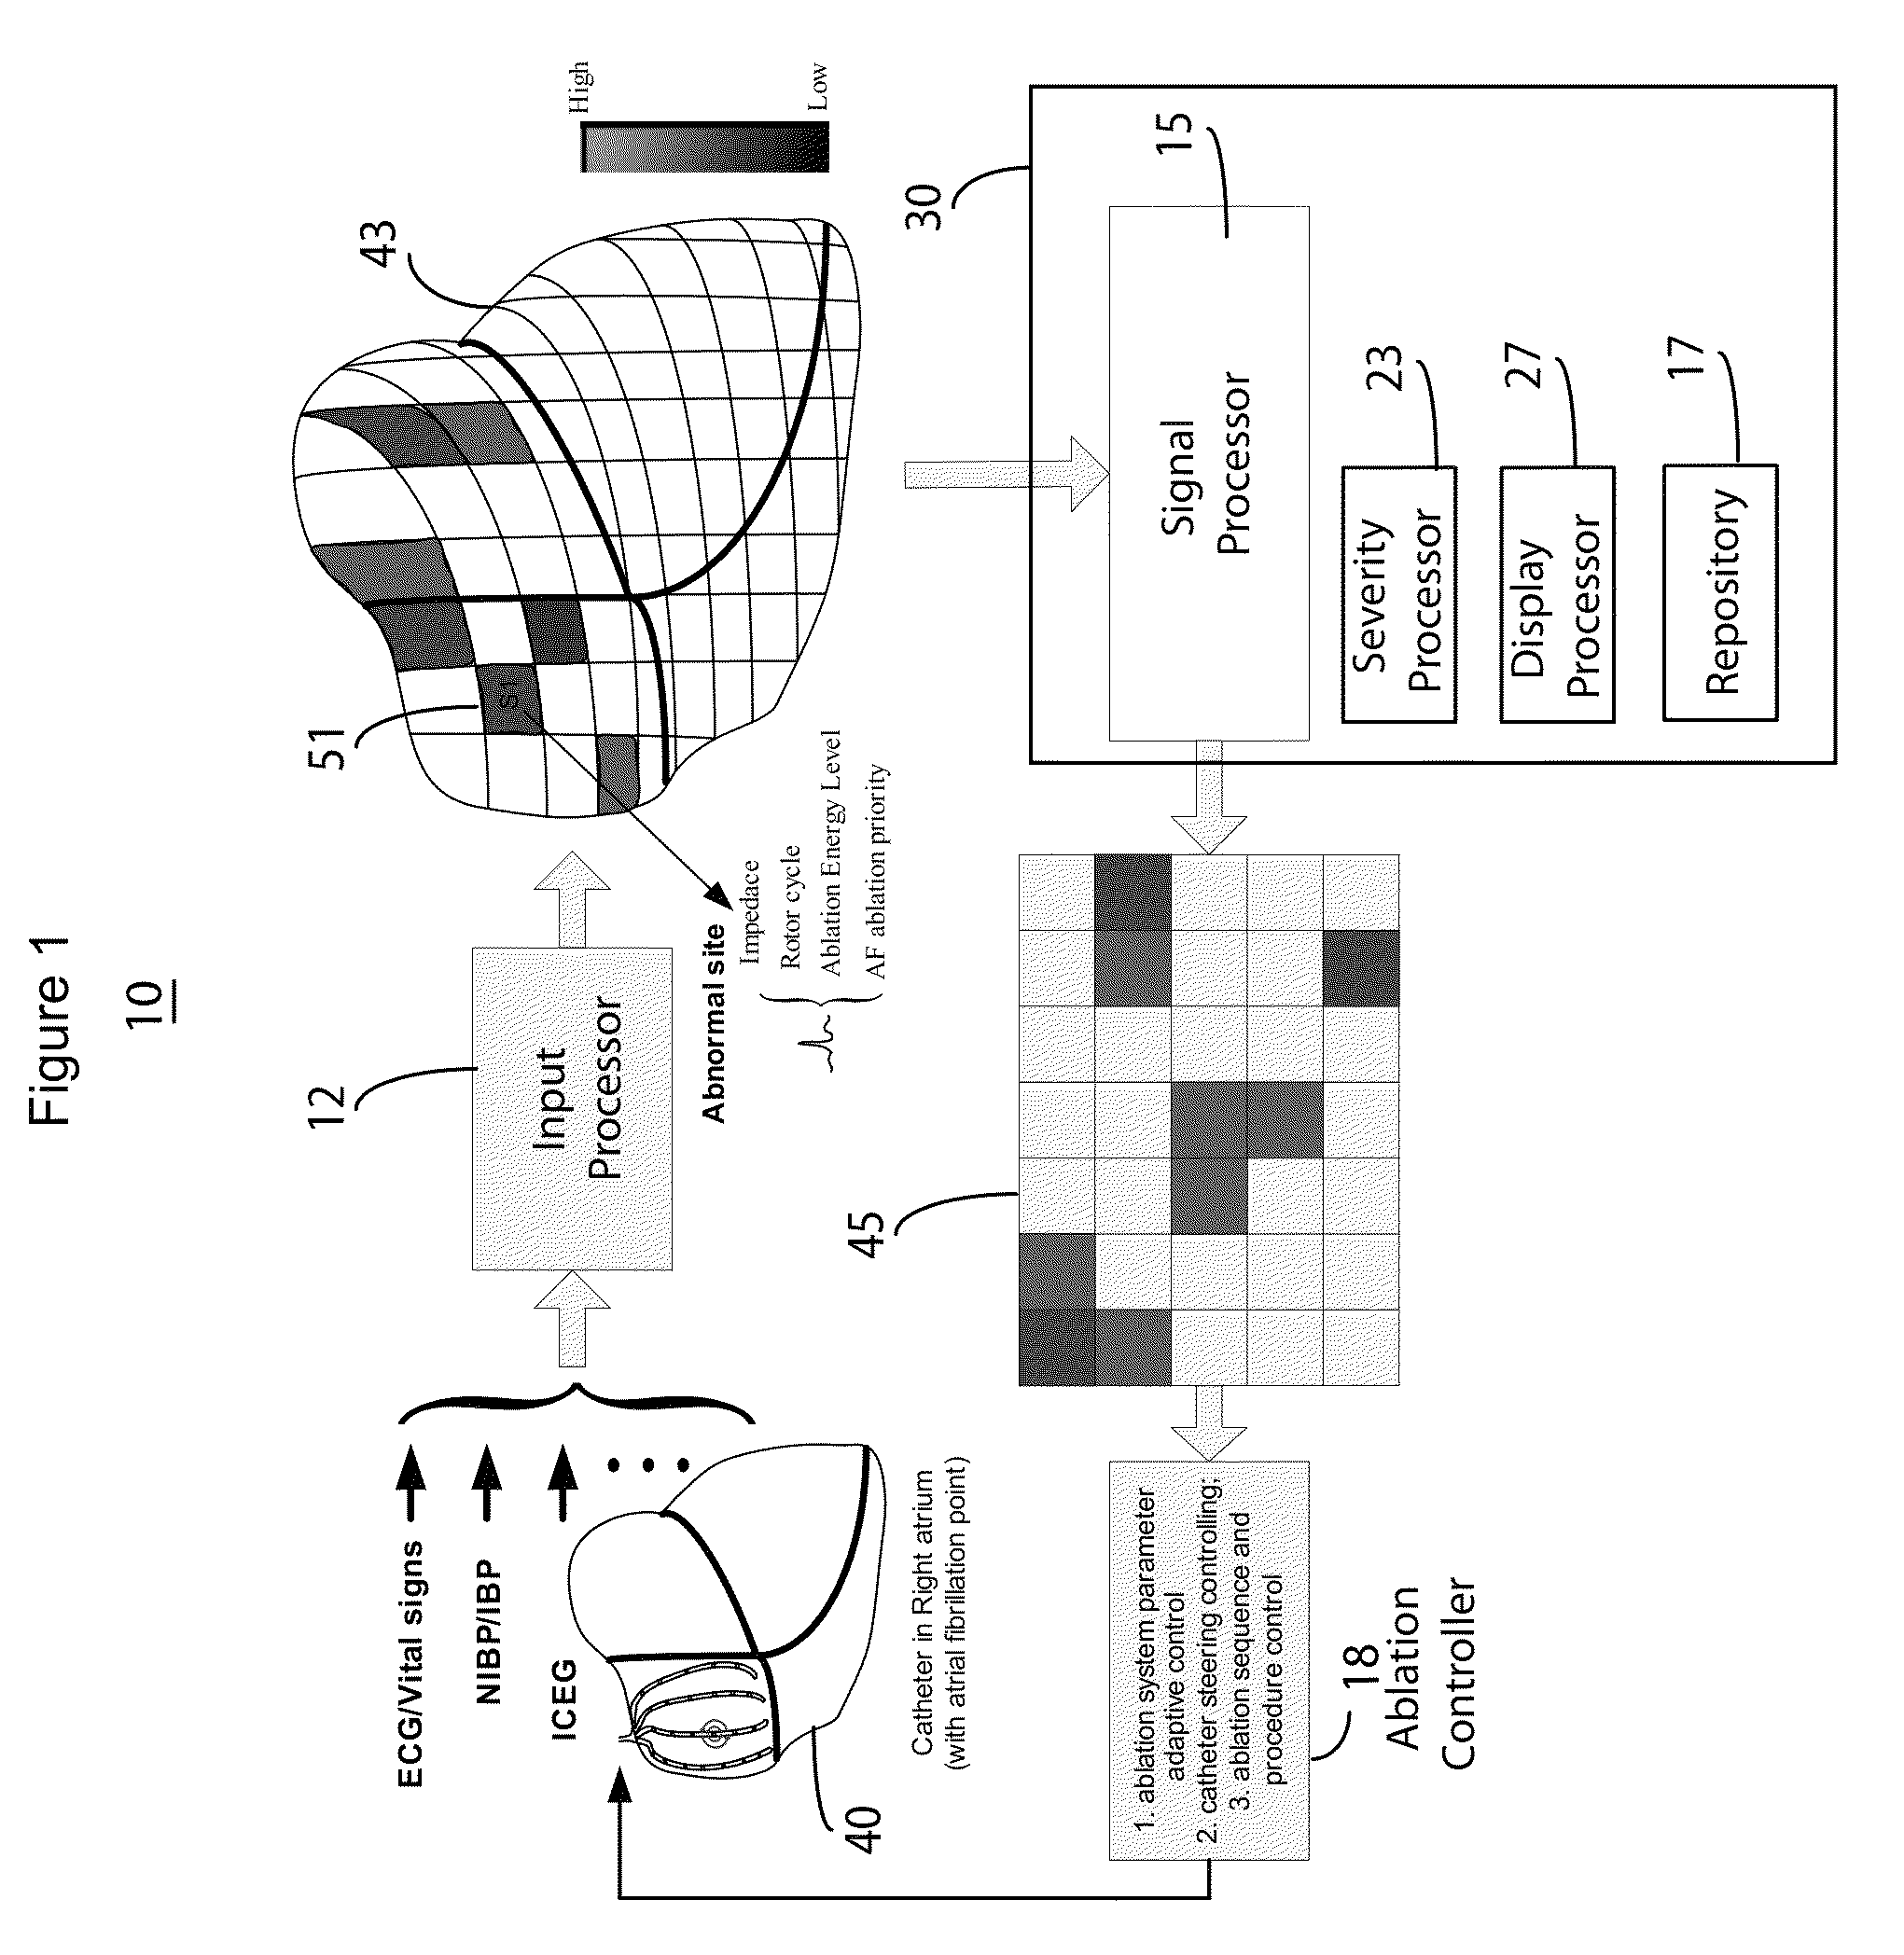 System for automatic medical ablation control